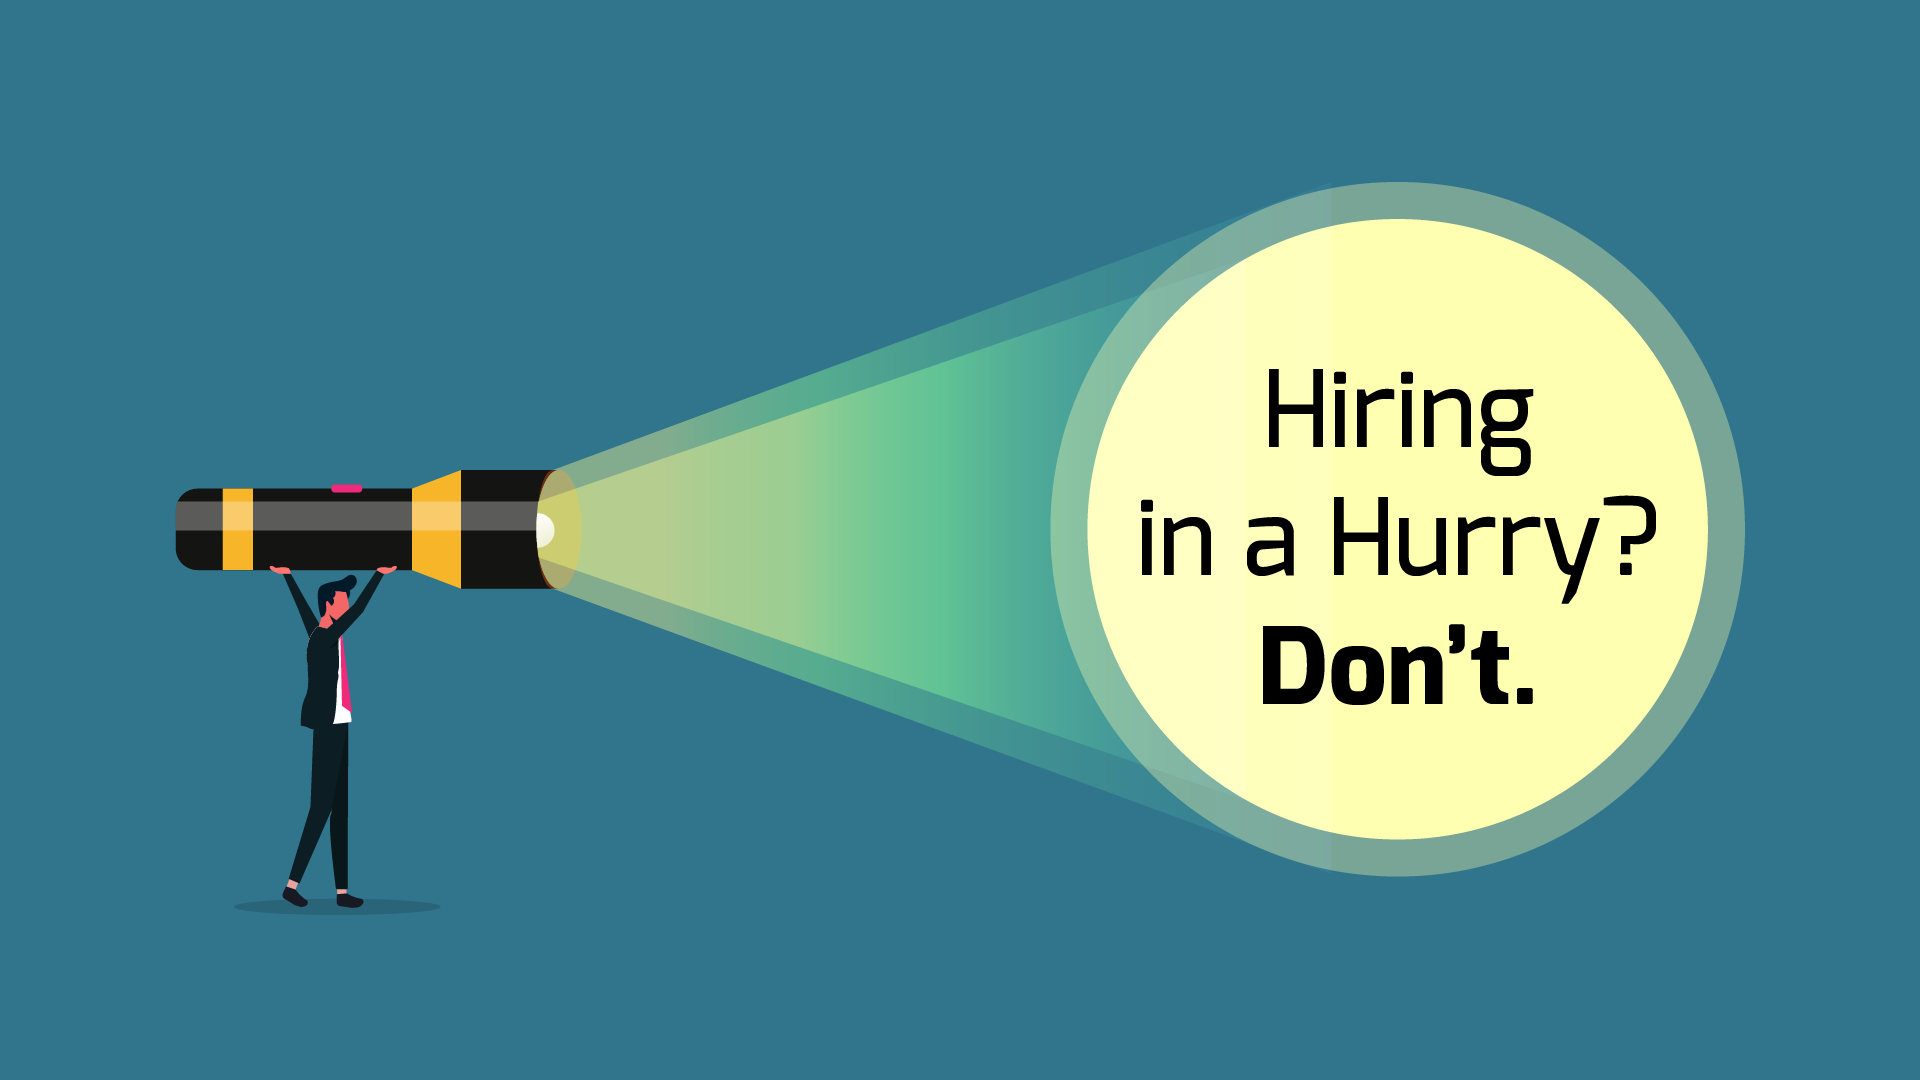 3 Important Tips if You Need to Hire in a Hurry